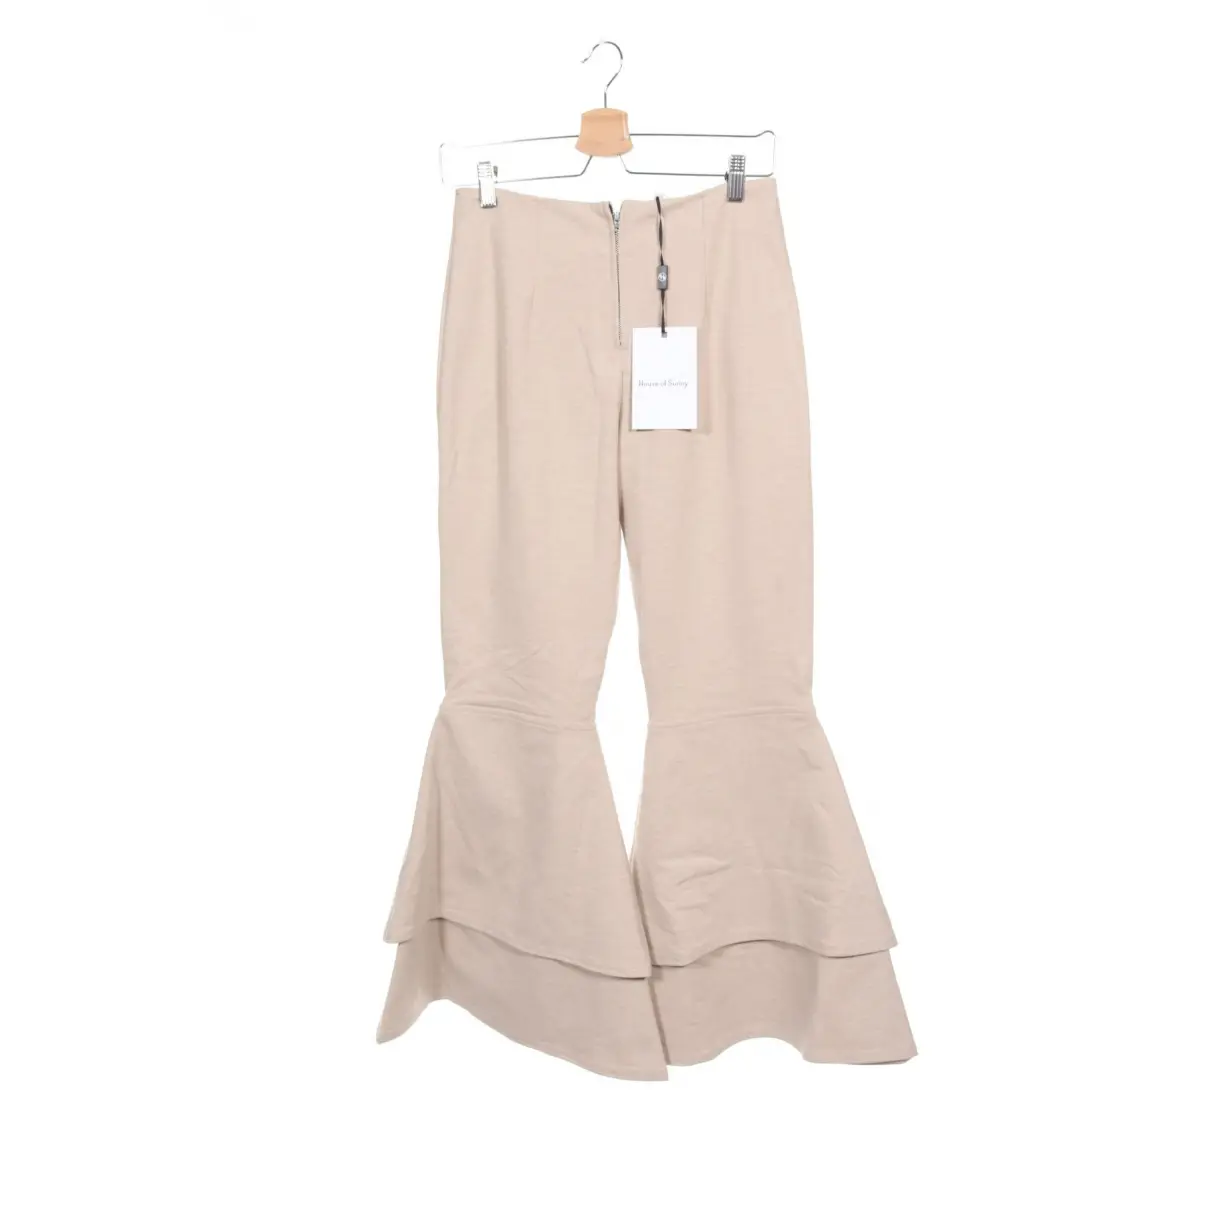 Buy House of sunny Trousers online